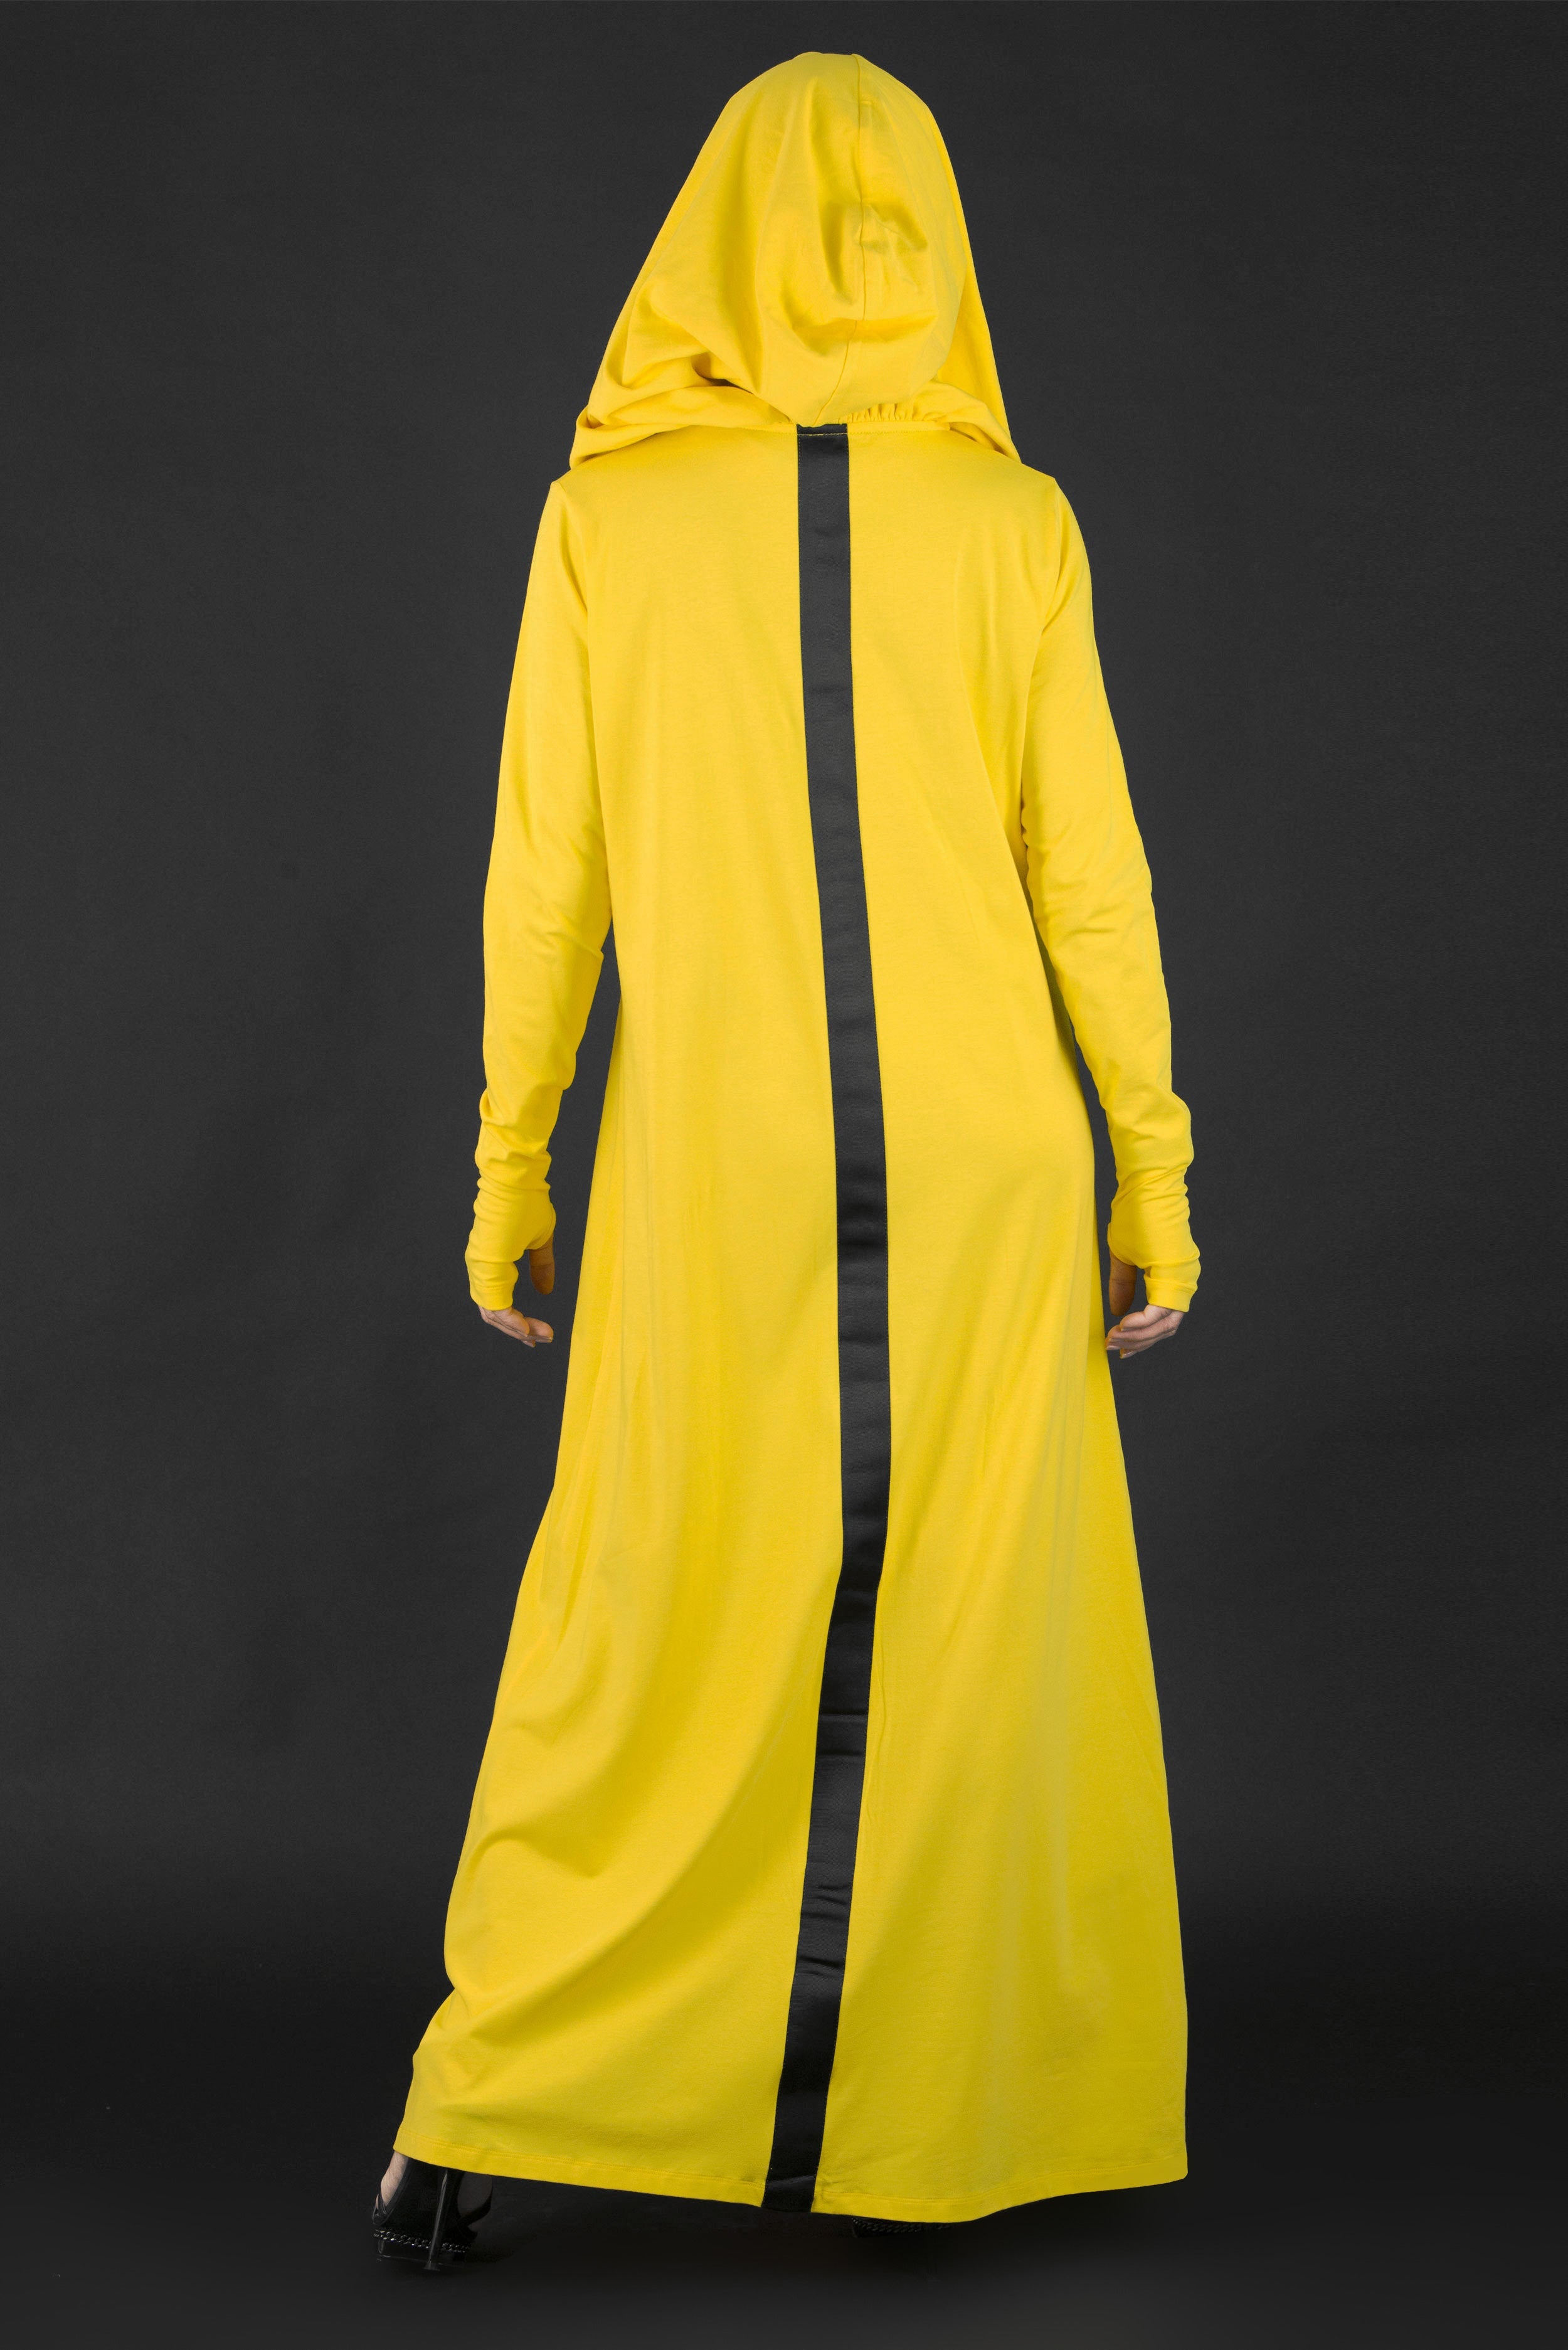 Yellow Hooded Long Dress with African Woman Print, New Arrival